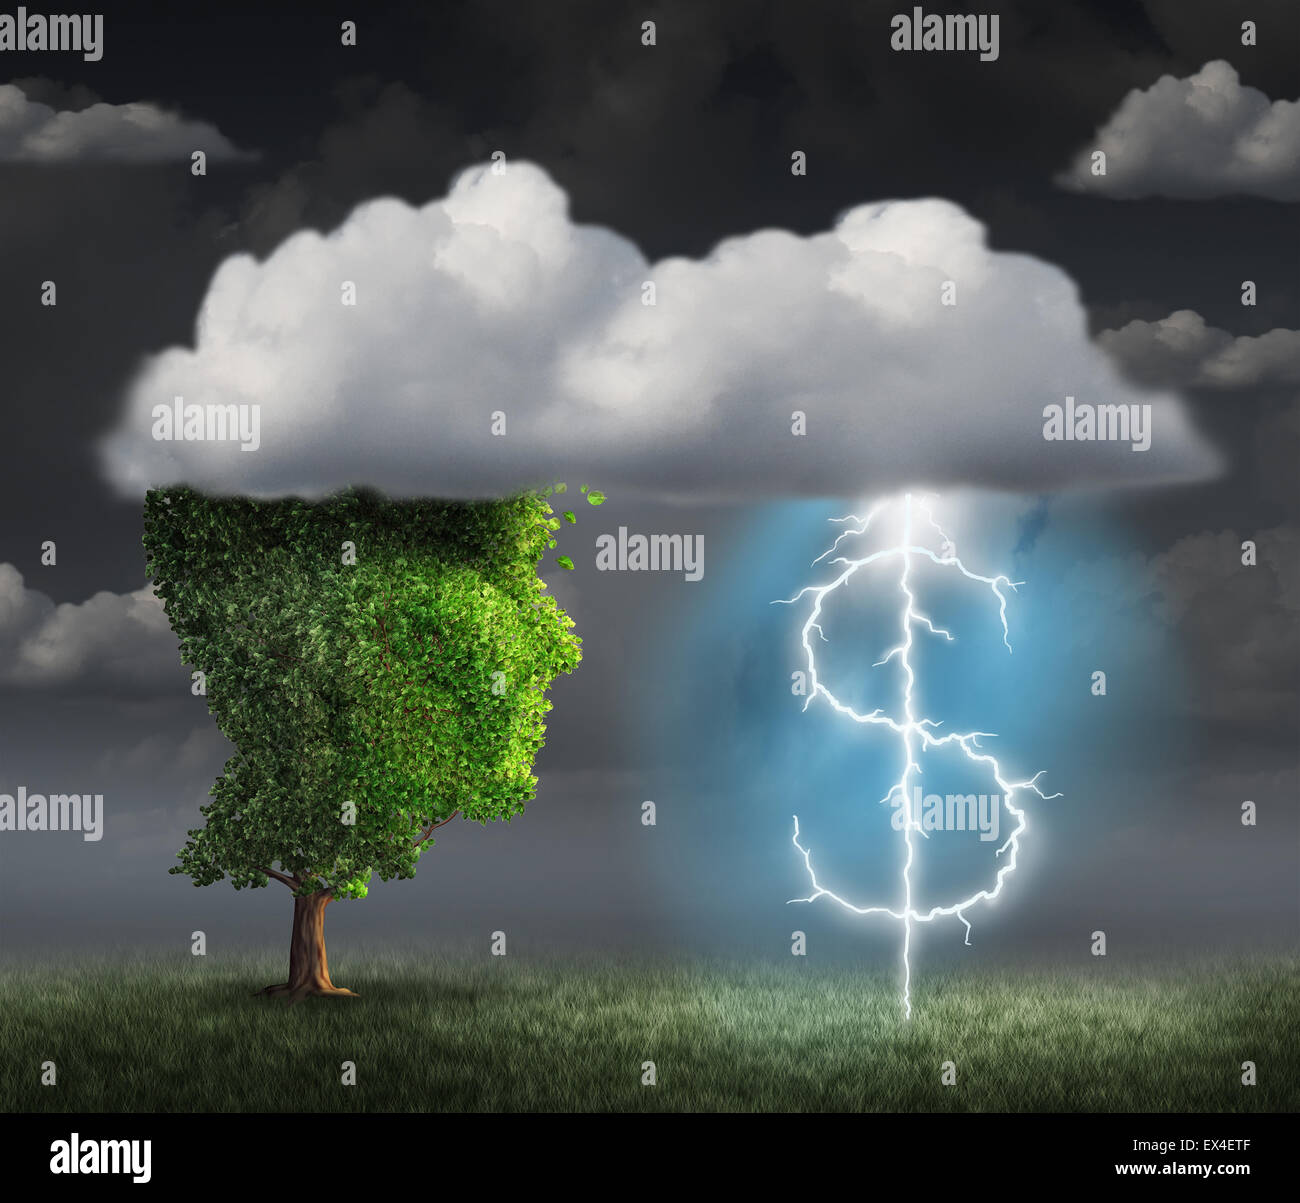 Money making idea as a wealth and entrepreneur concept with a tree head in the clouds with a lightning bolt shaped as a dollar sign as a financial symbol for debt management and profit solution. Stock Photo